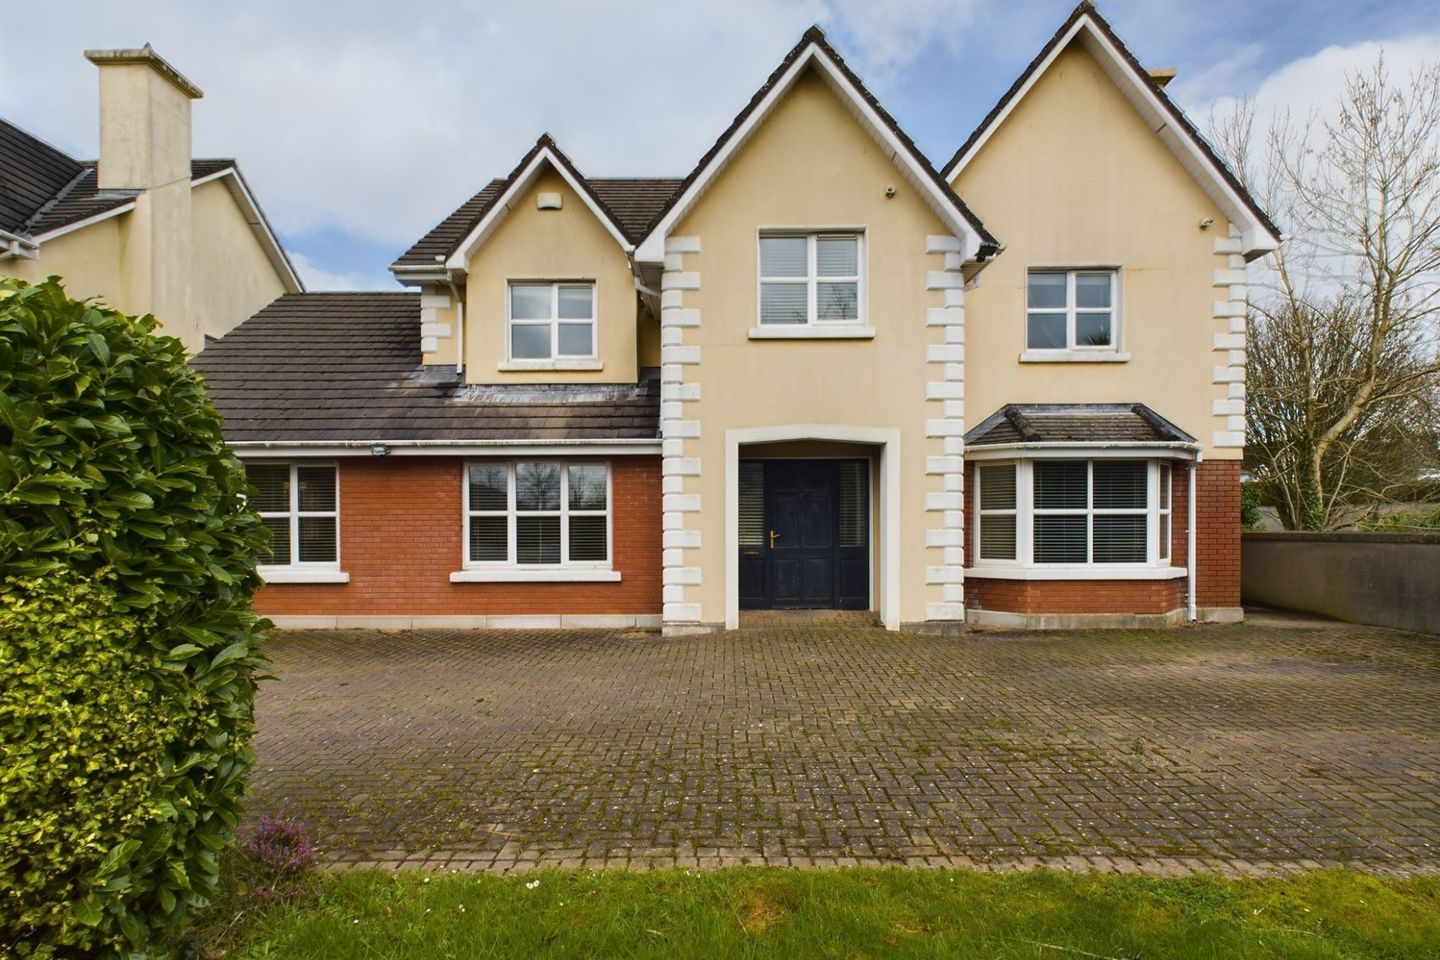 7 Maypark Grove, Maypark Lane, Waterford, Waterford City, Co. Waterford, X91W01P